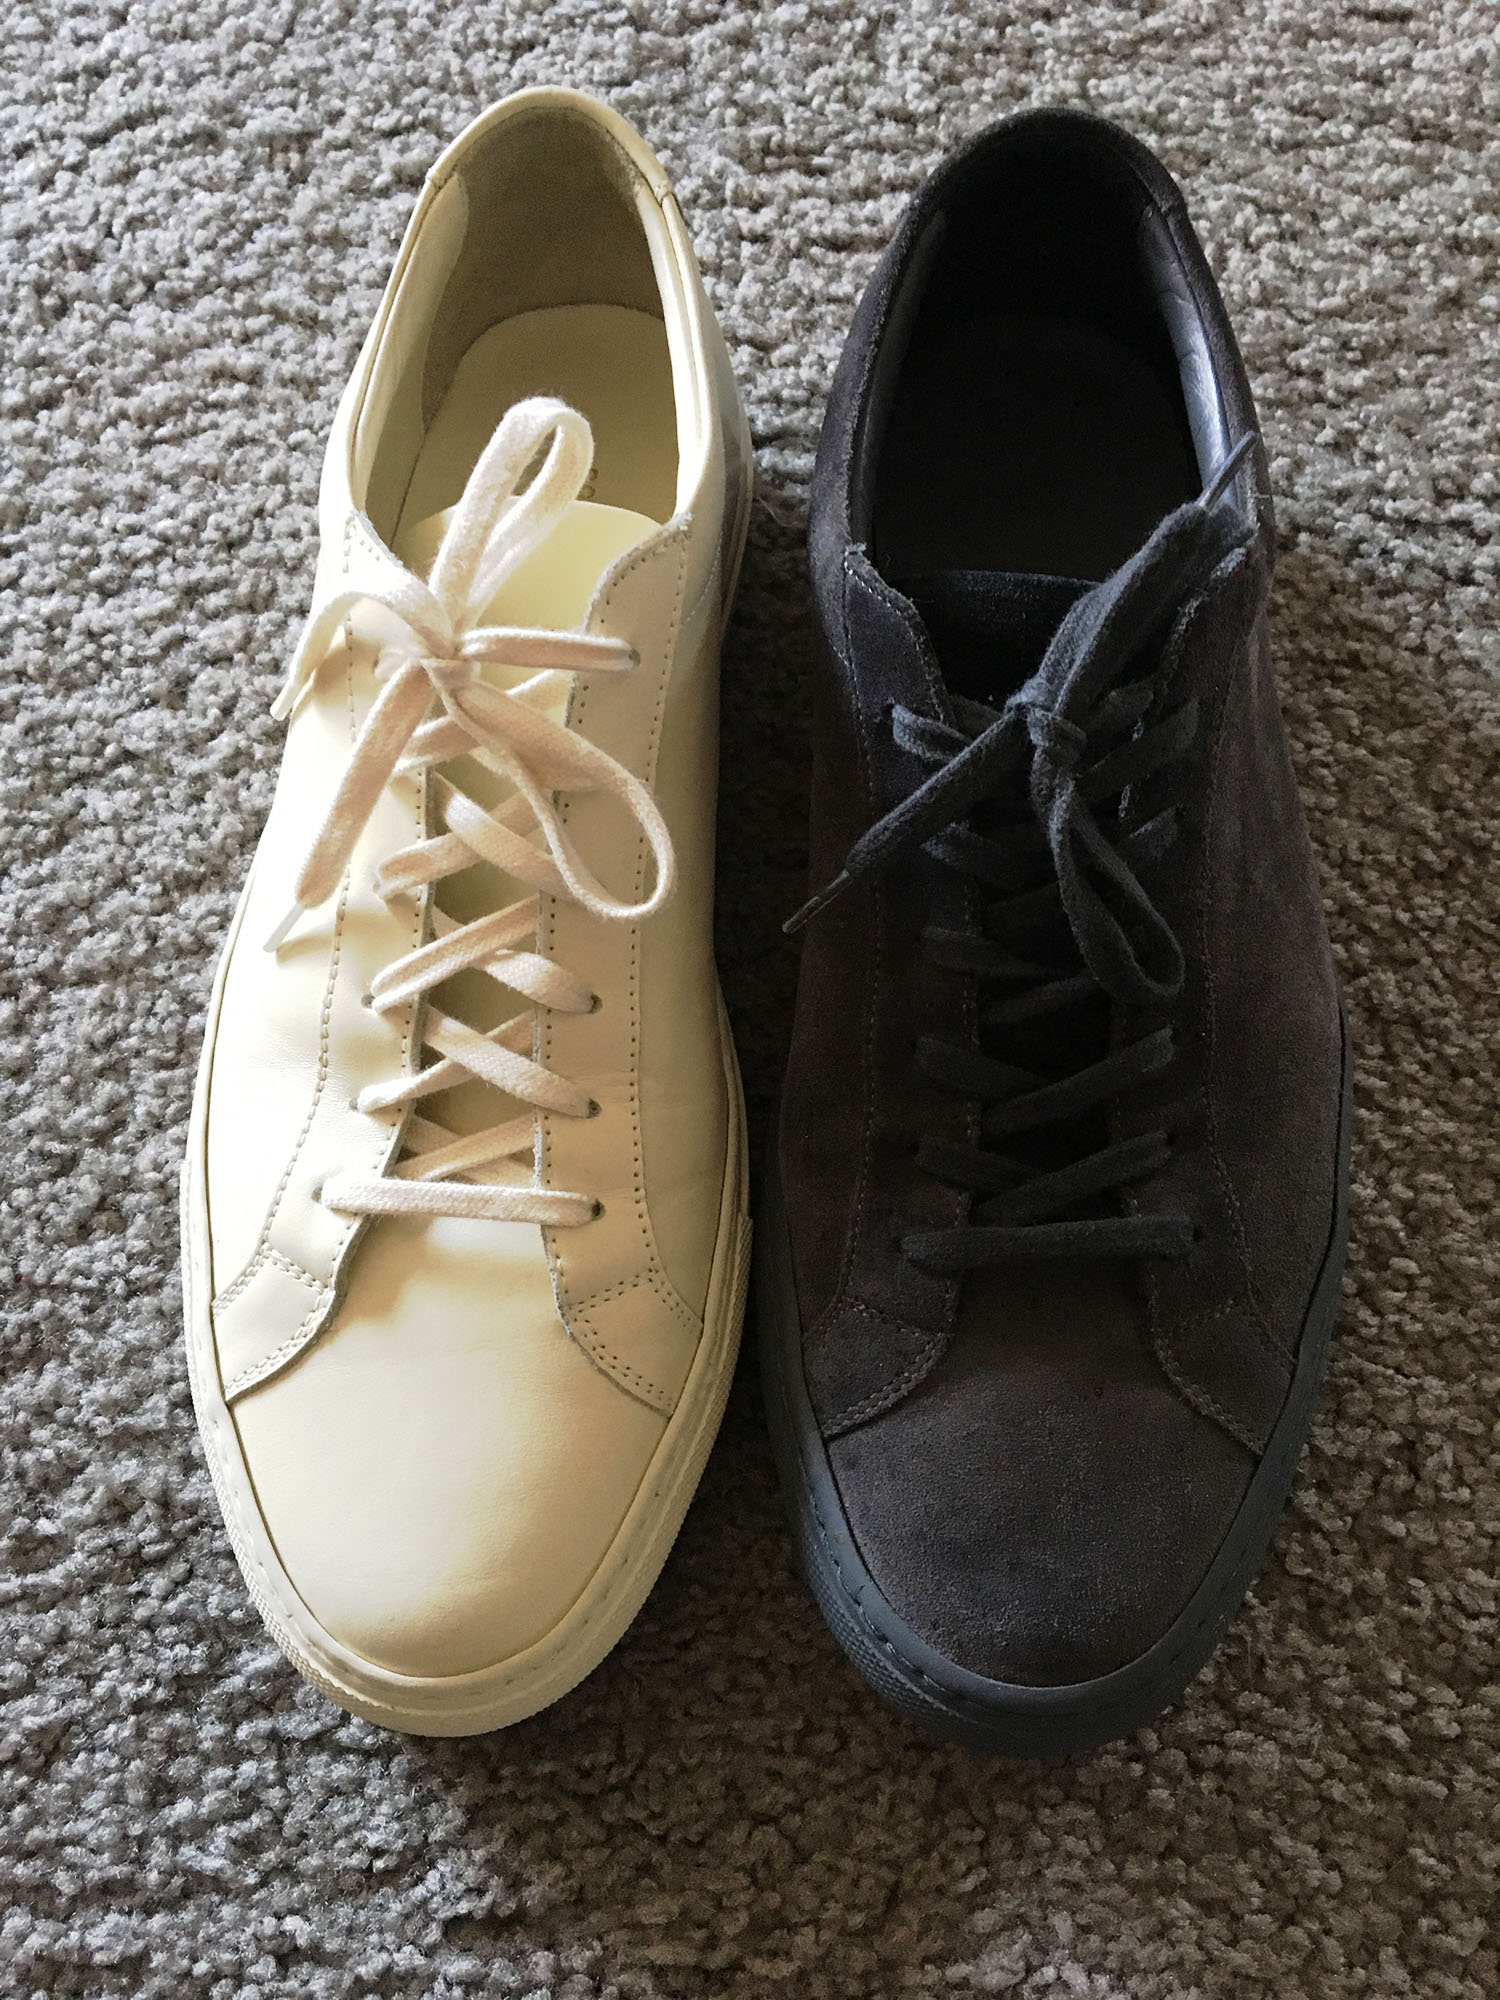 Common Projects: 5 Reasons to Buy Suede or Leather - EMPLOOM